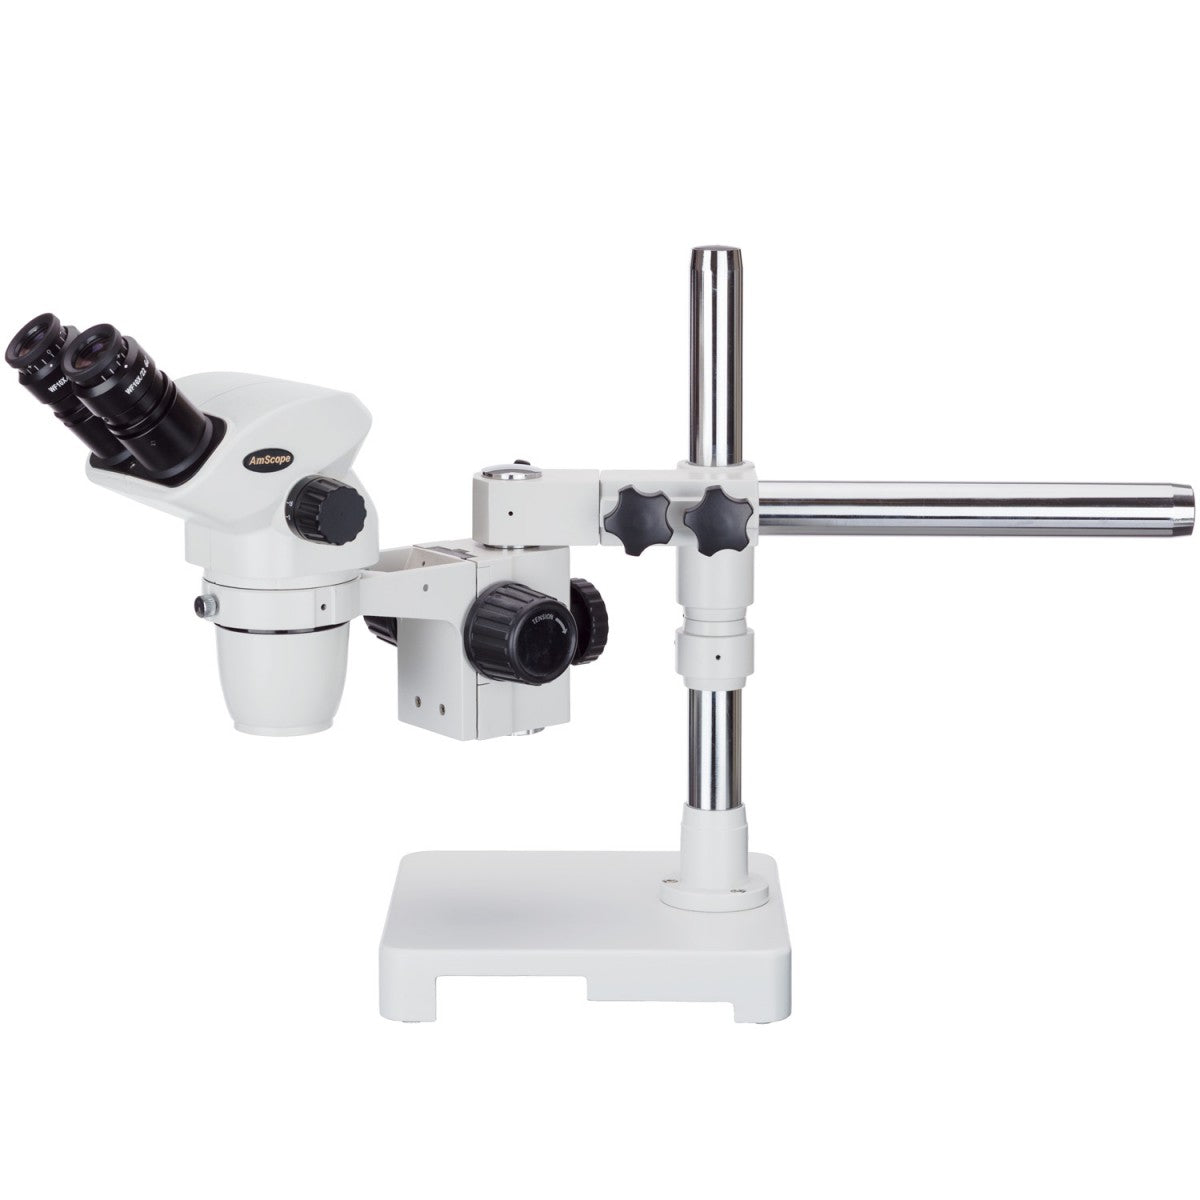 AmScope 6.7x-45x Stereo Zoom Microscope with Single-Arm Boom Stand